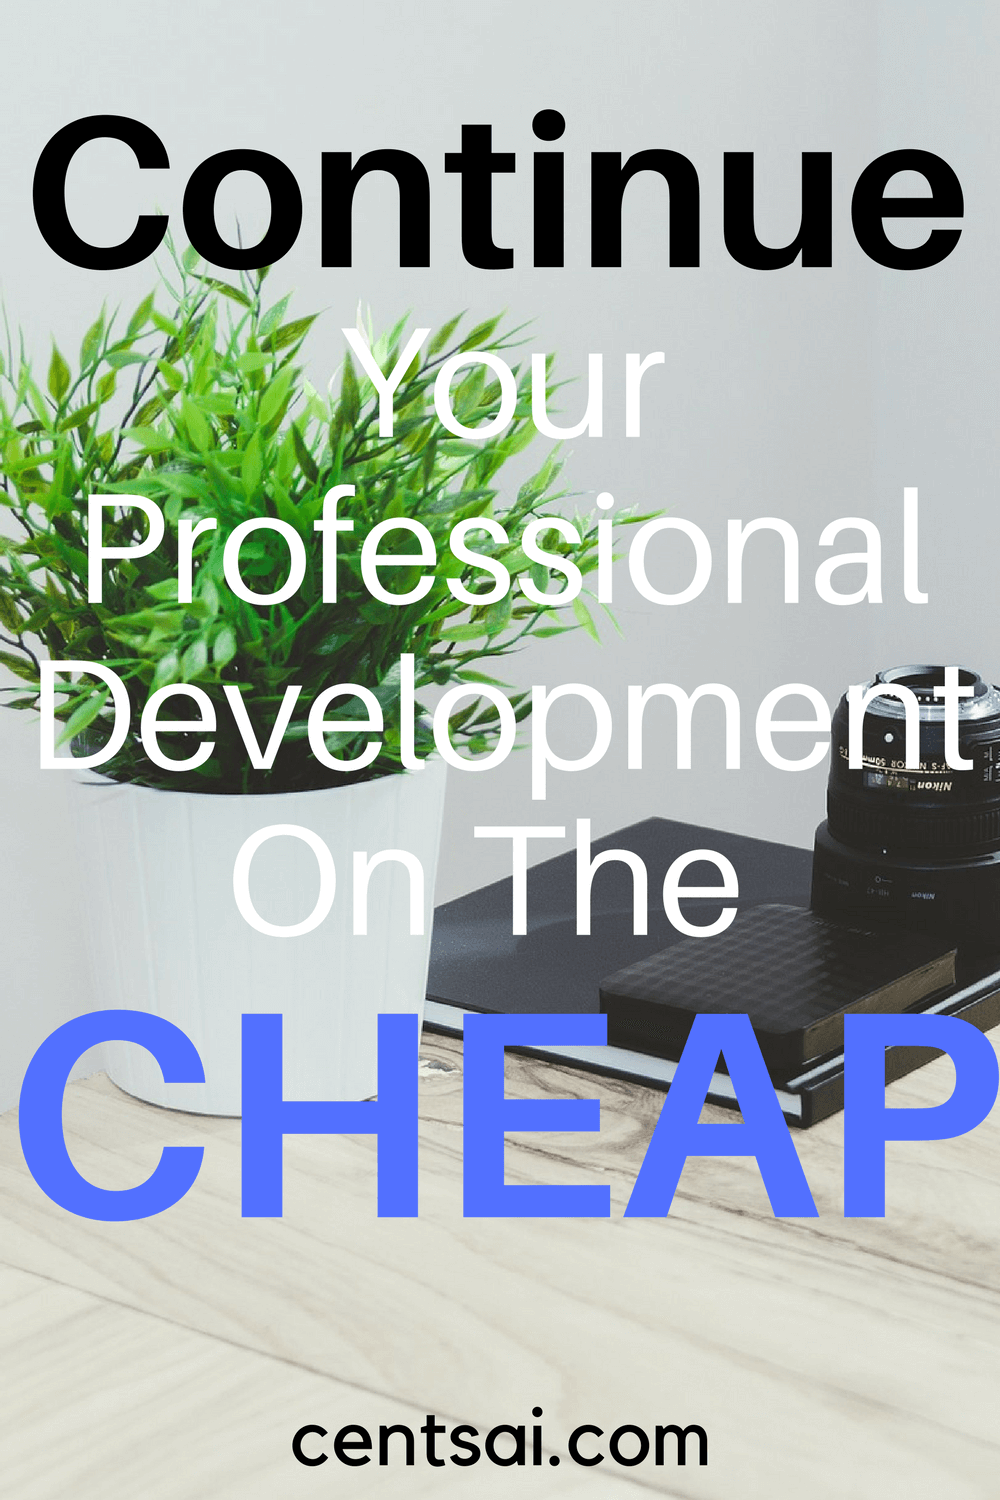 Continue Your Professional Development On The Cheap. Whether you're on a salary or you're self-employed, professional development can be essential to your career.